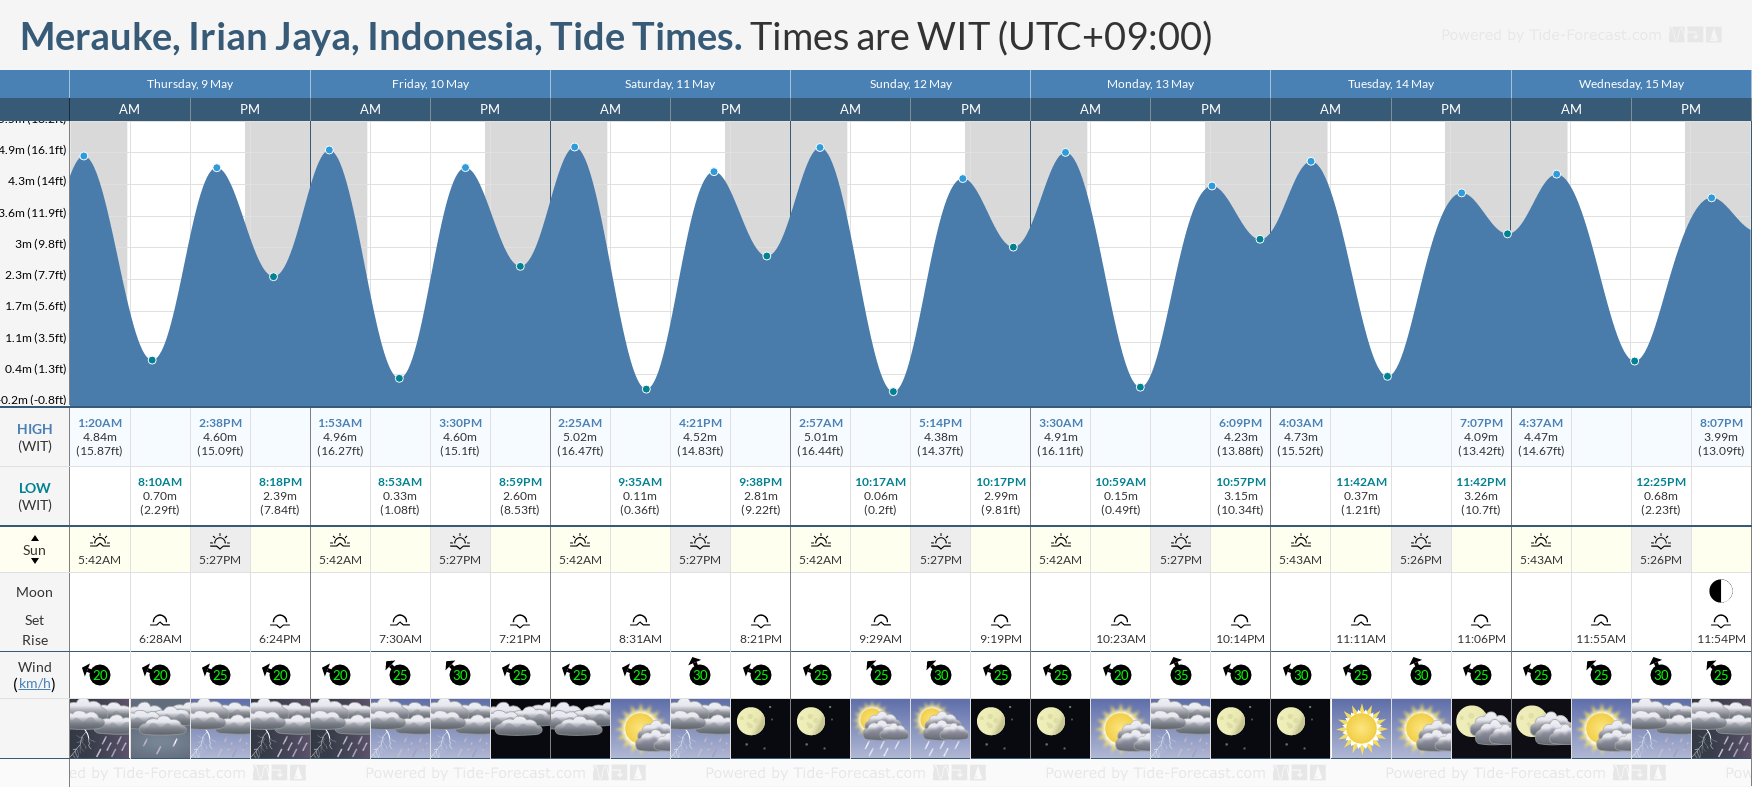 Merauke, Irian Jaya, Indonesia Tide Chart including high and low tide tide times for the next 7 days